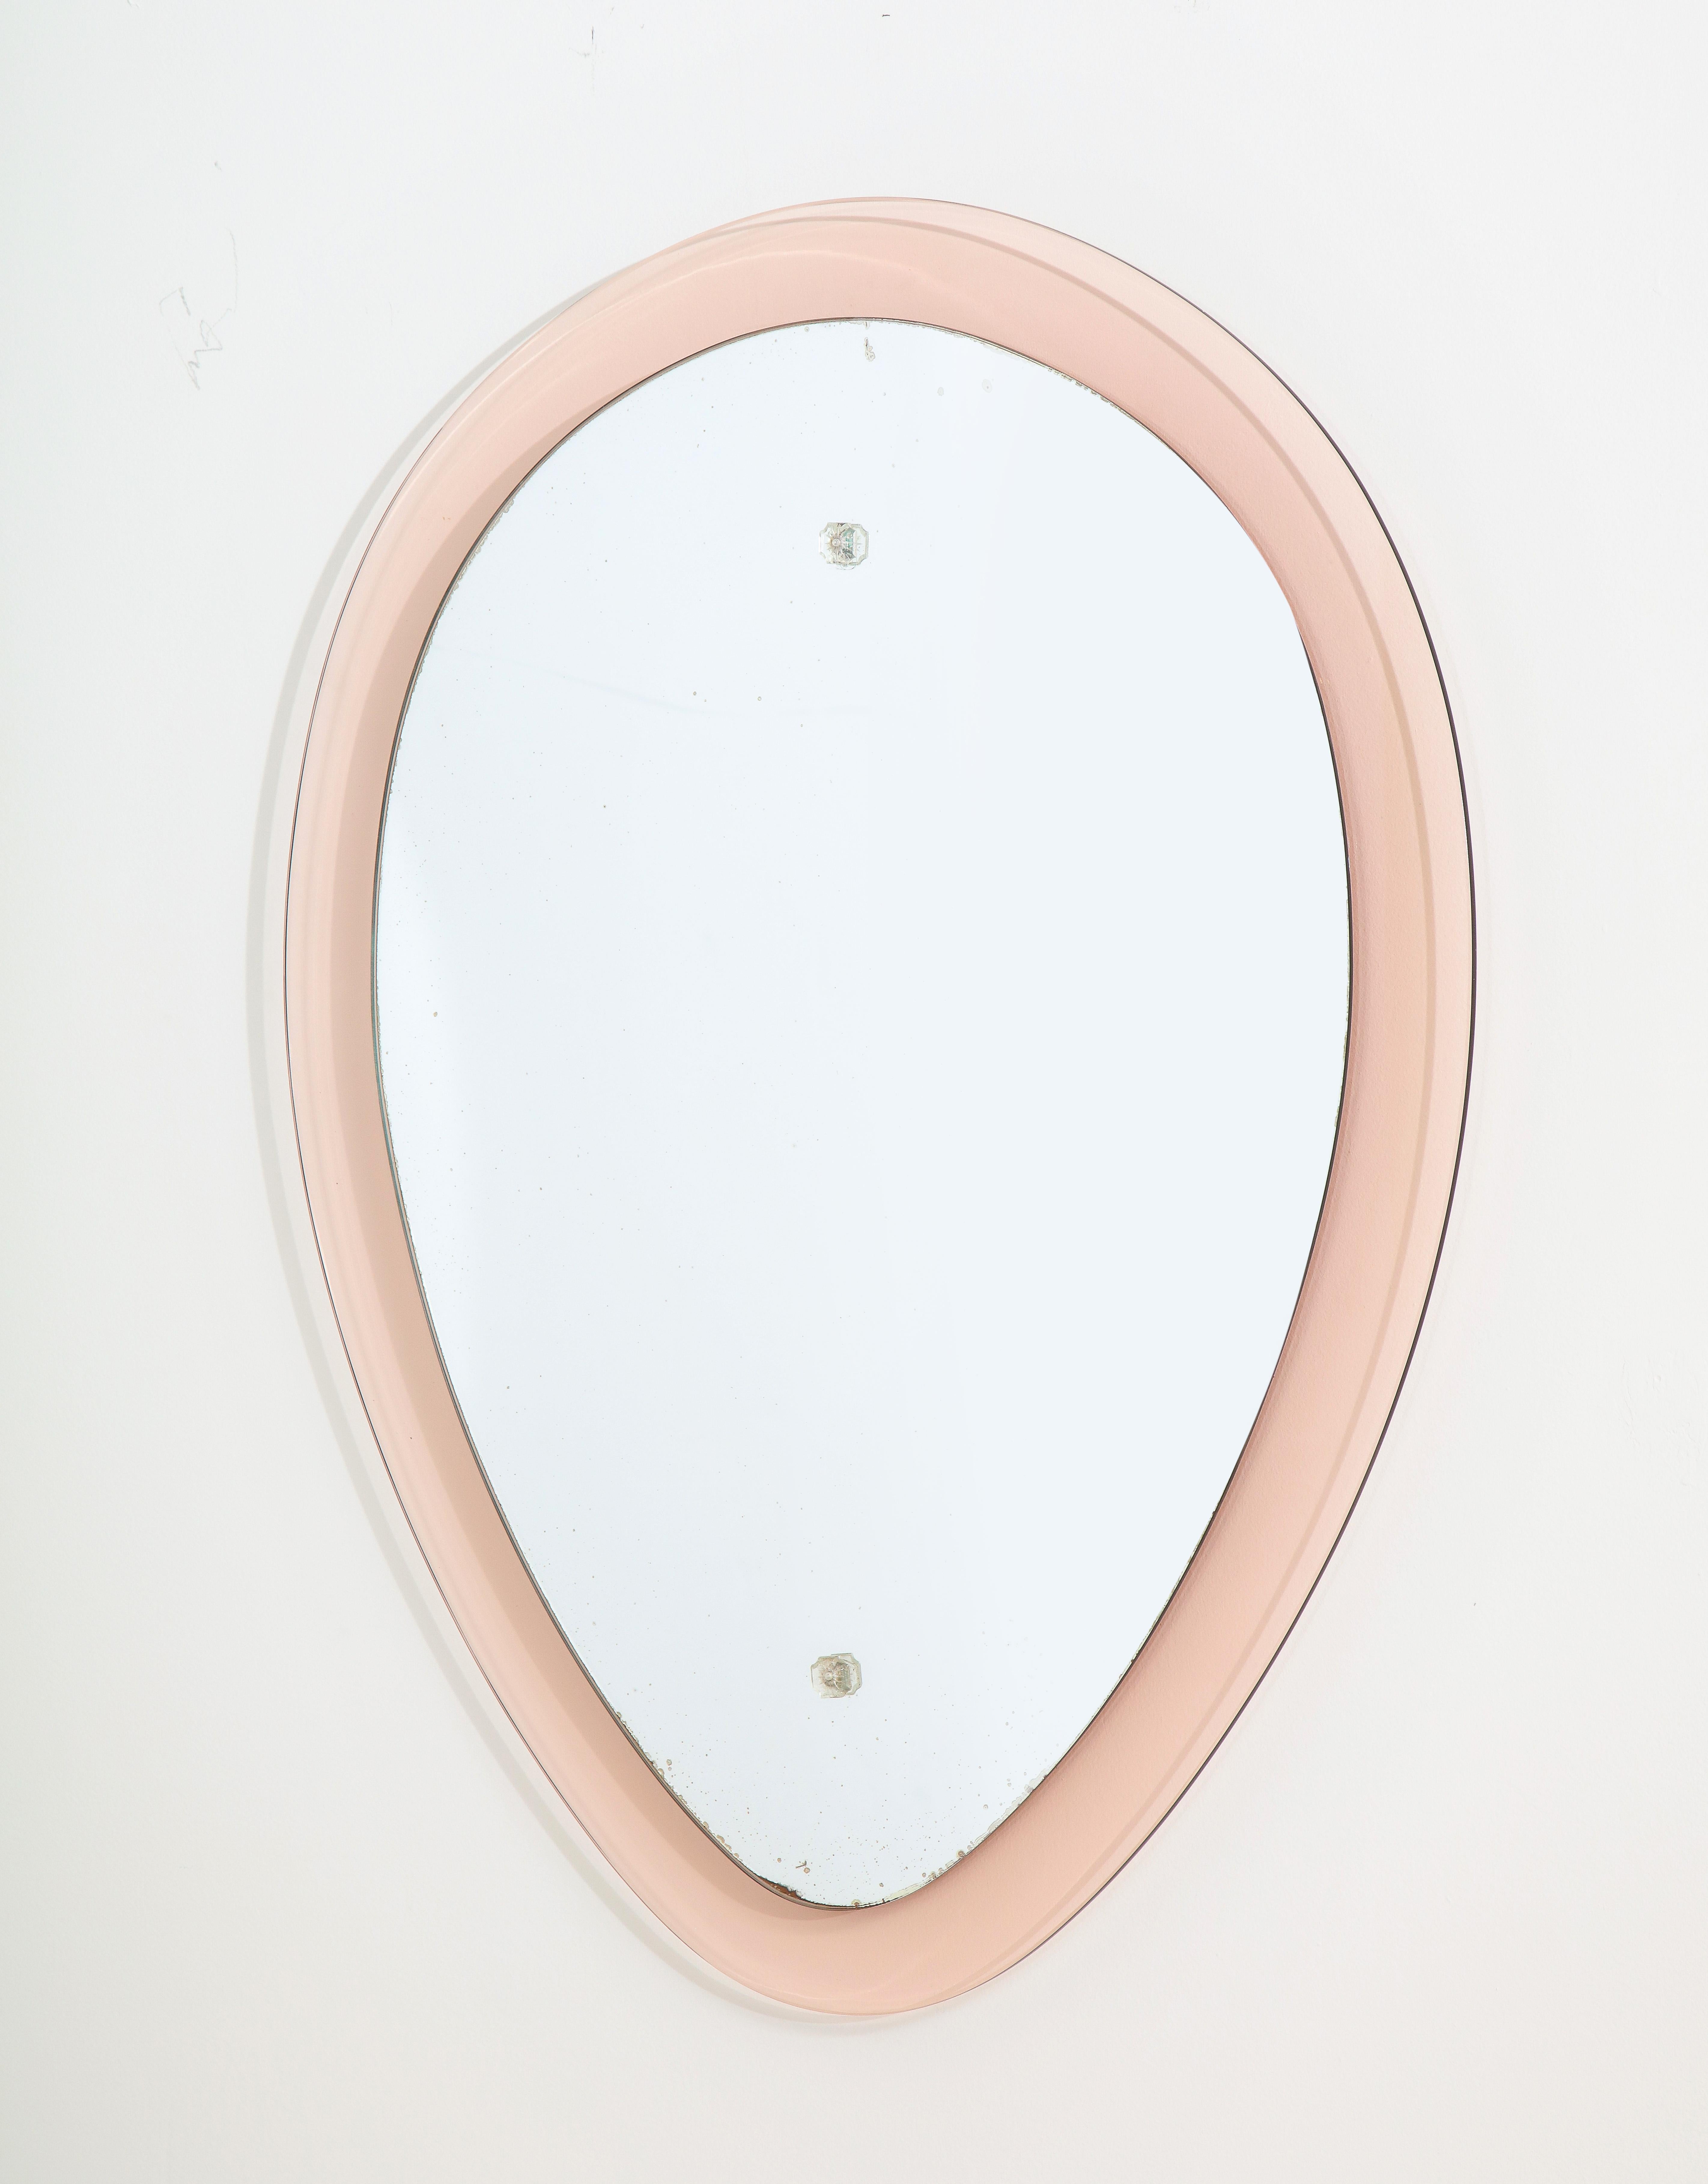 An Italian beautiful pale pink and clear glass mirror in the shape of a reverse teardrop. The oval mid-section is clear glass and is raised which gives a floating effect, the hardware on the clear glass is crystal. 
Italy, circa 1955
Size: 31 1/2